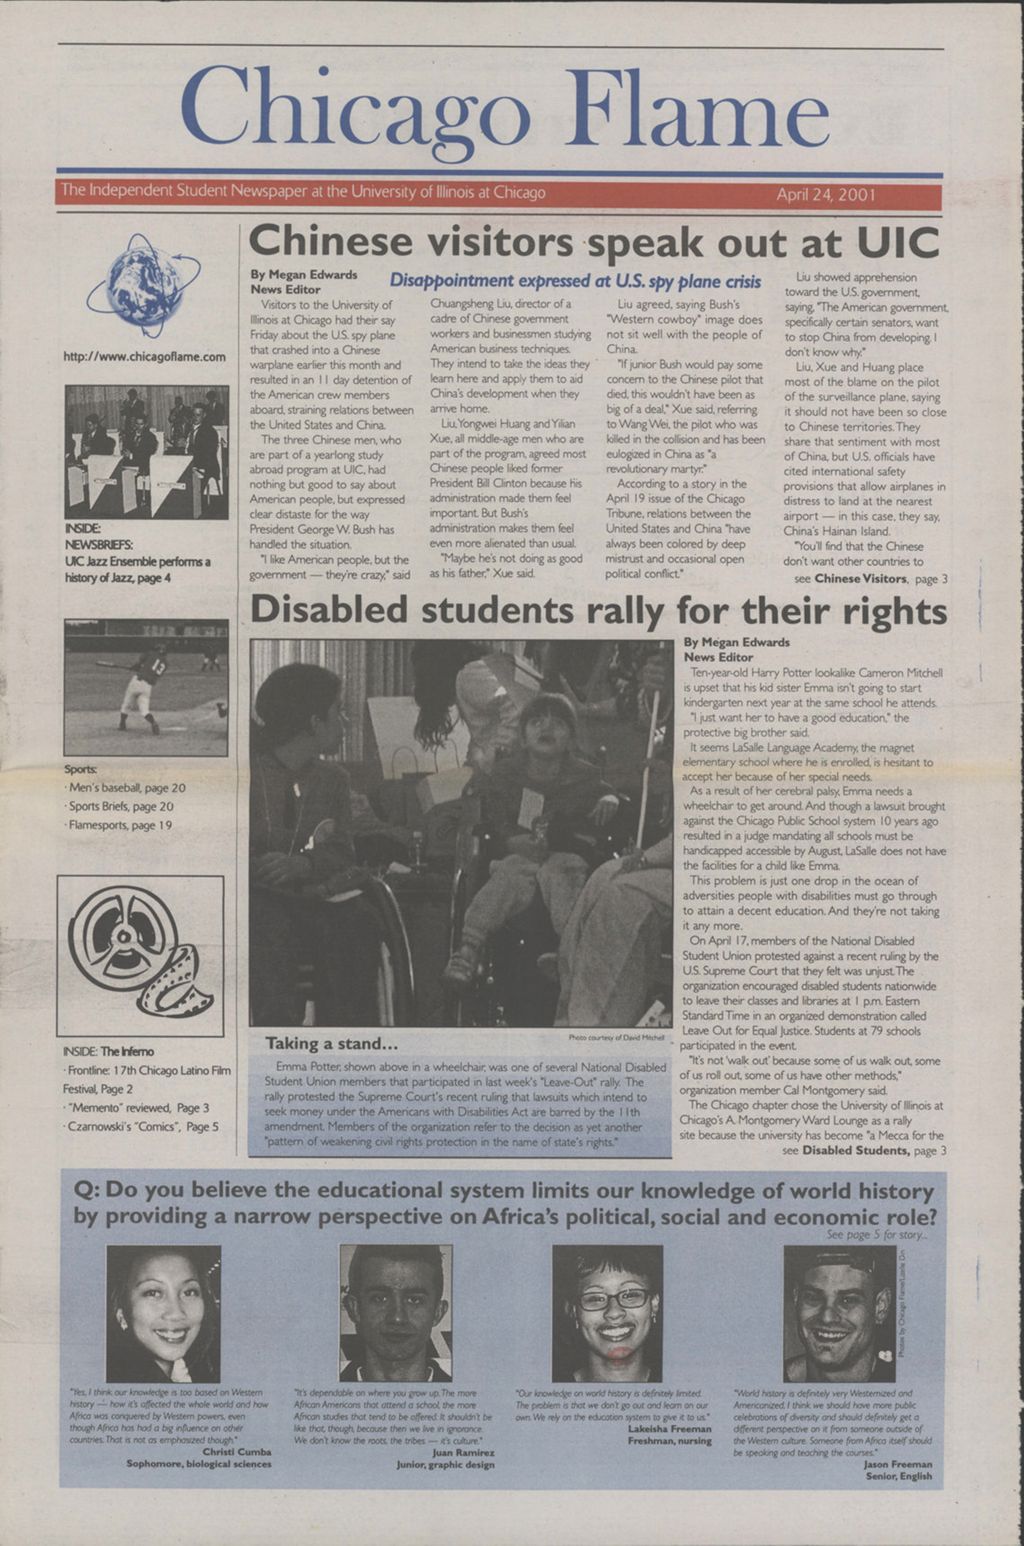 Chicago Flame (April 24, 2001)